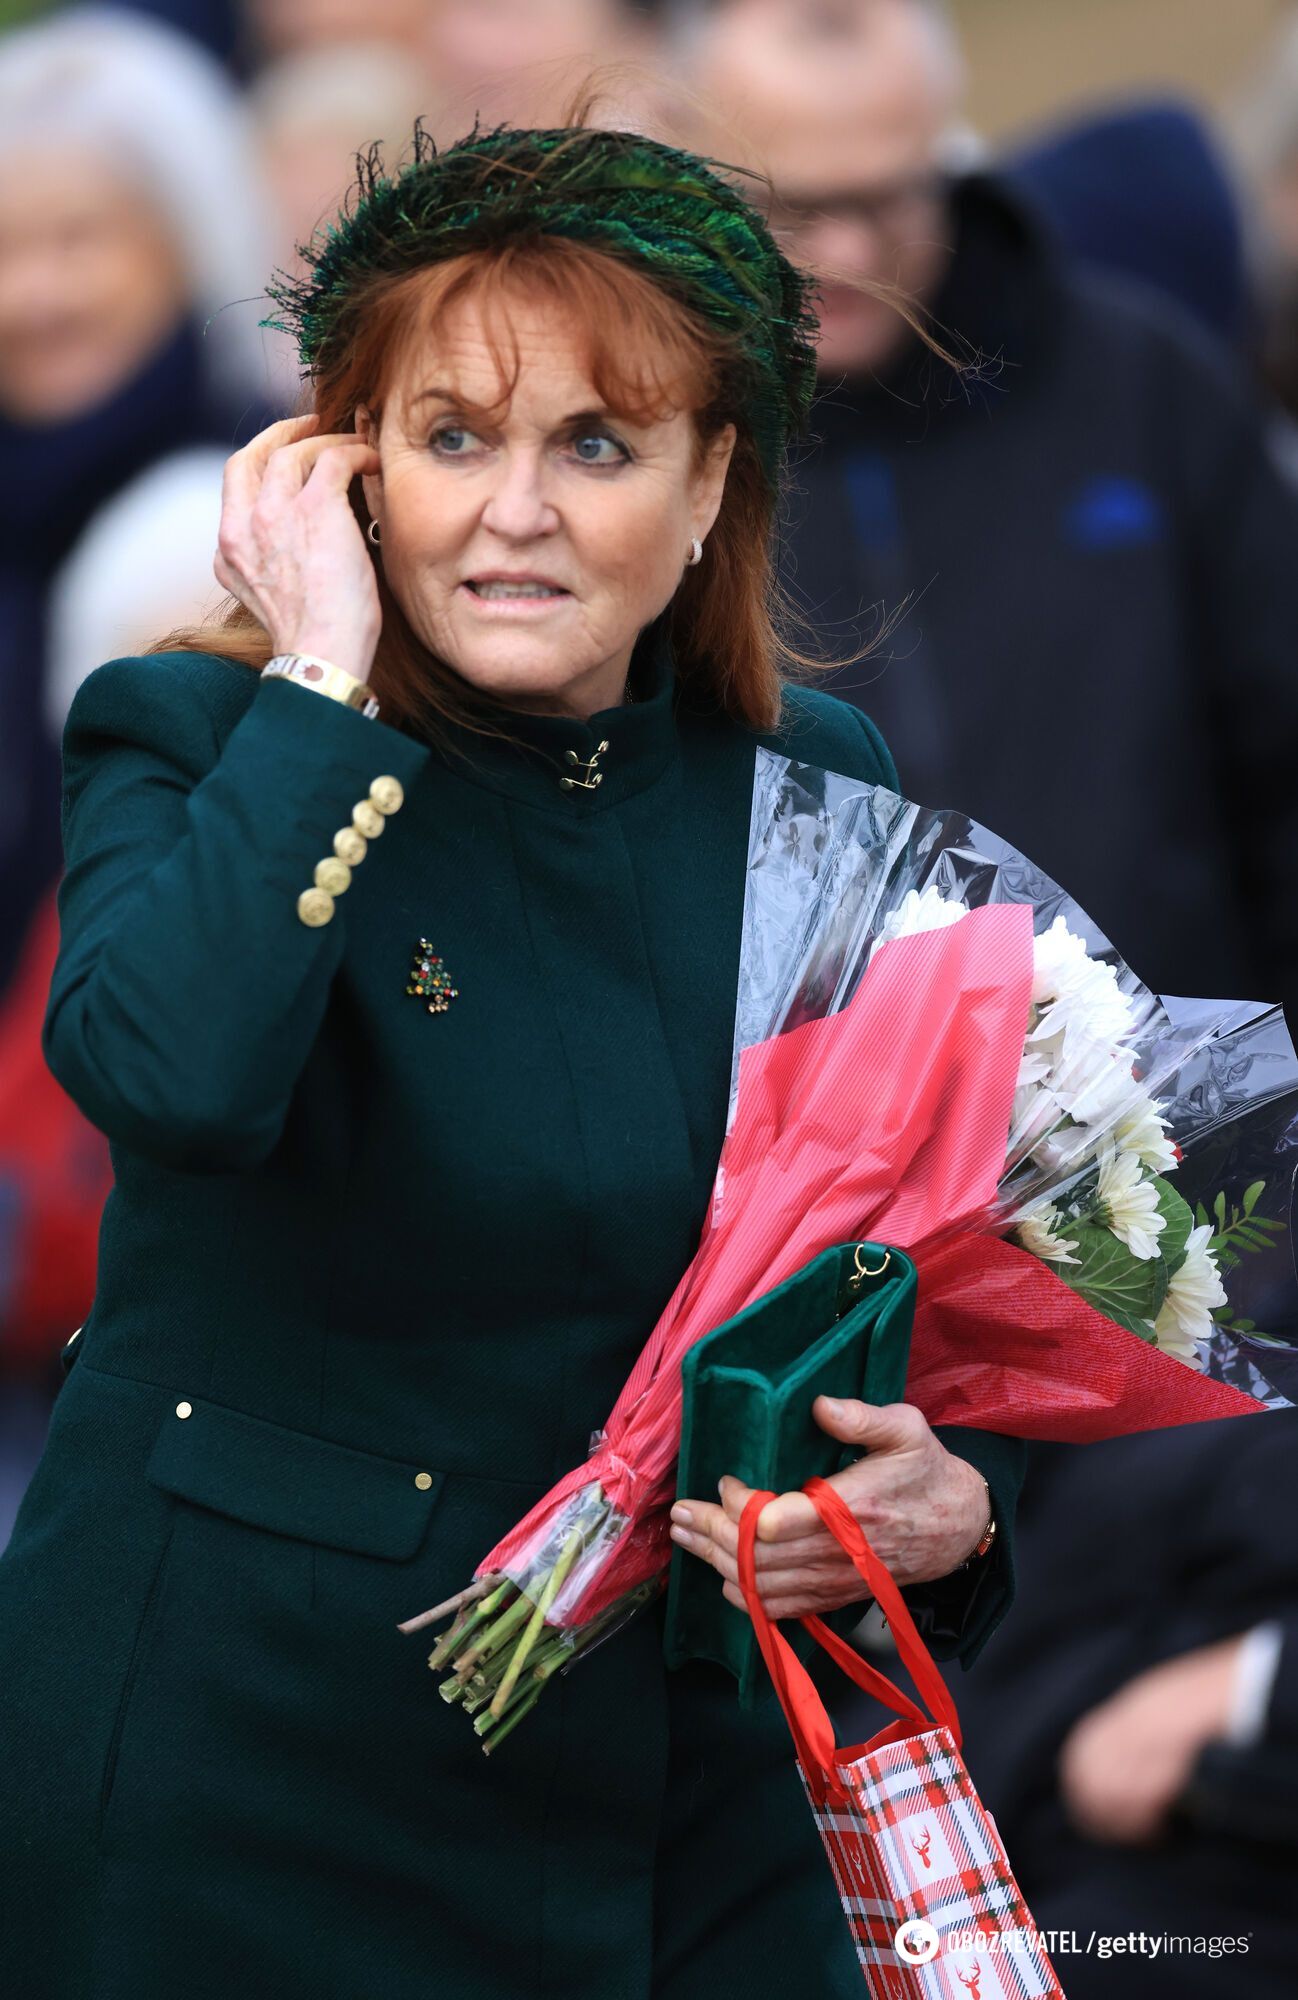 Duchess of York was diagnosed with melanoma after breast cancer treatment